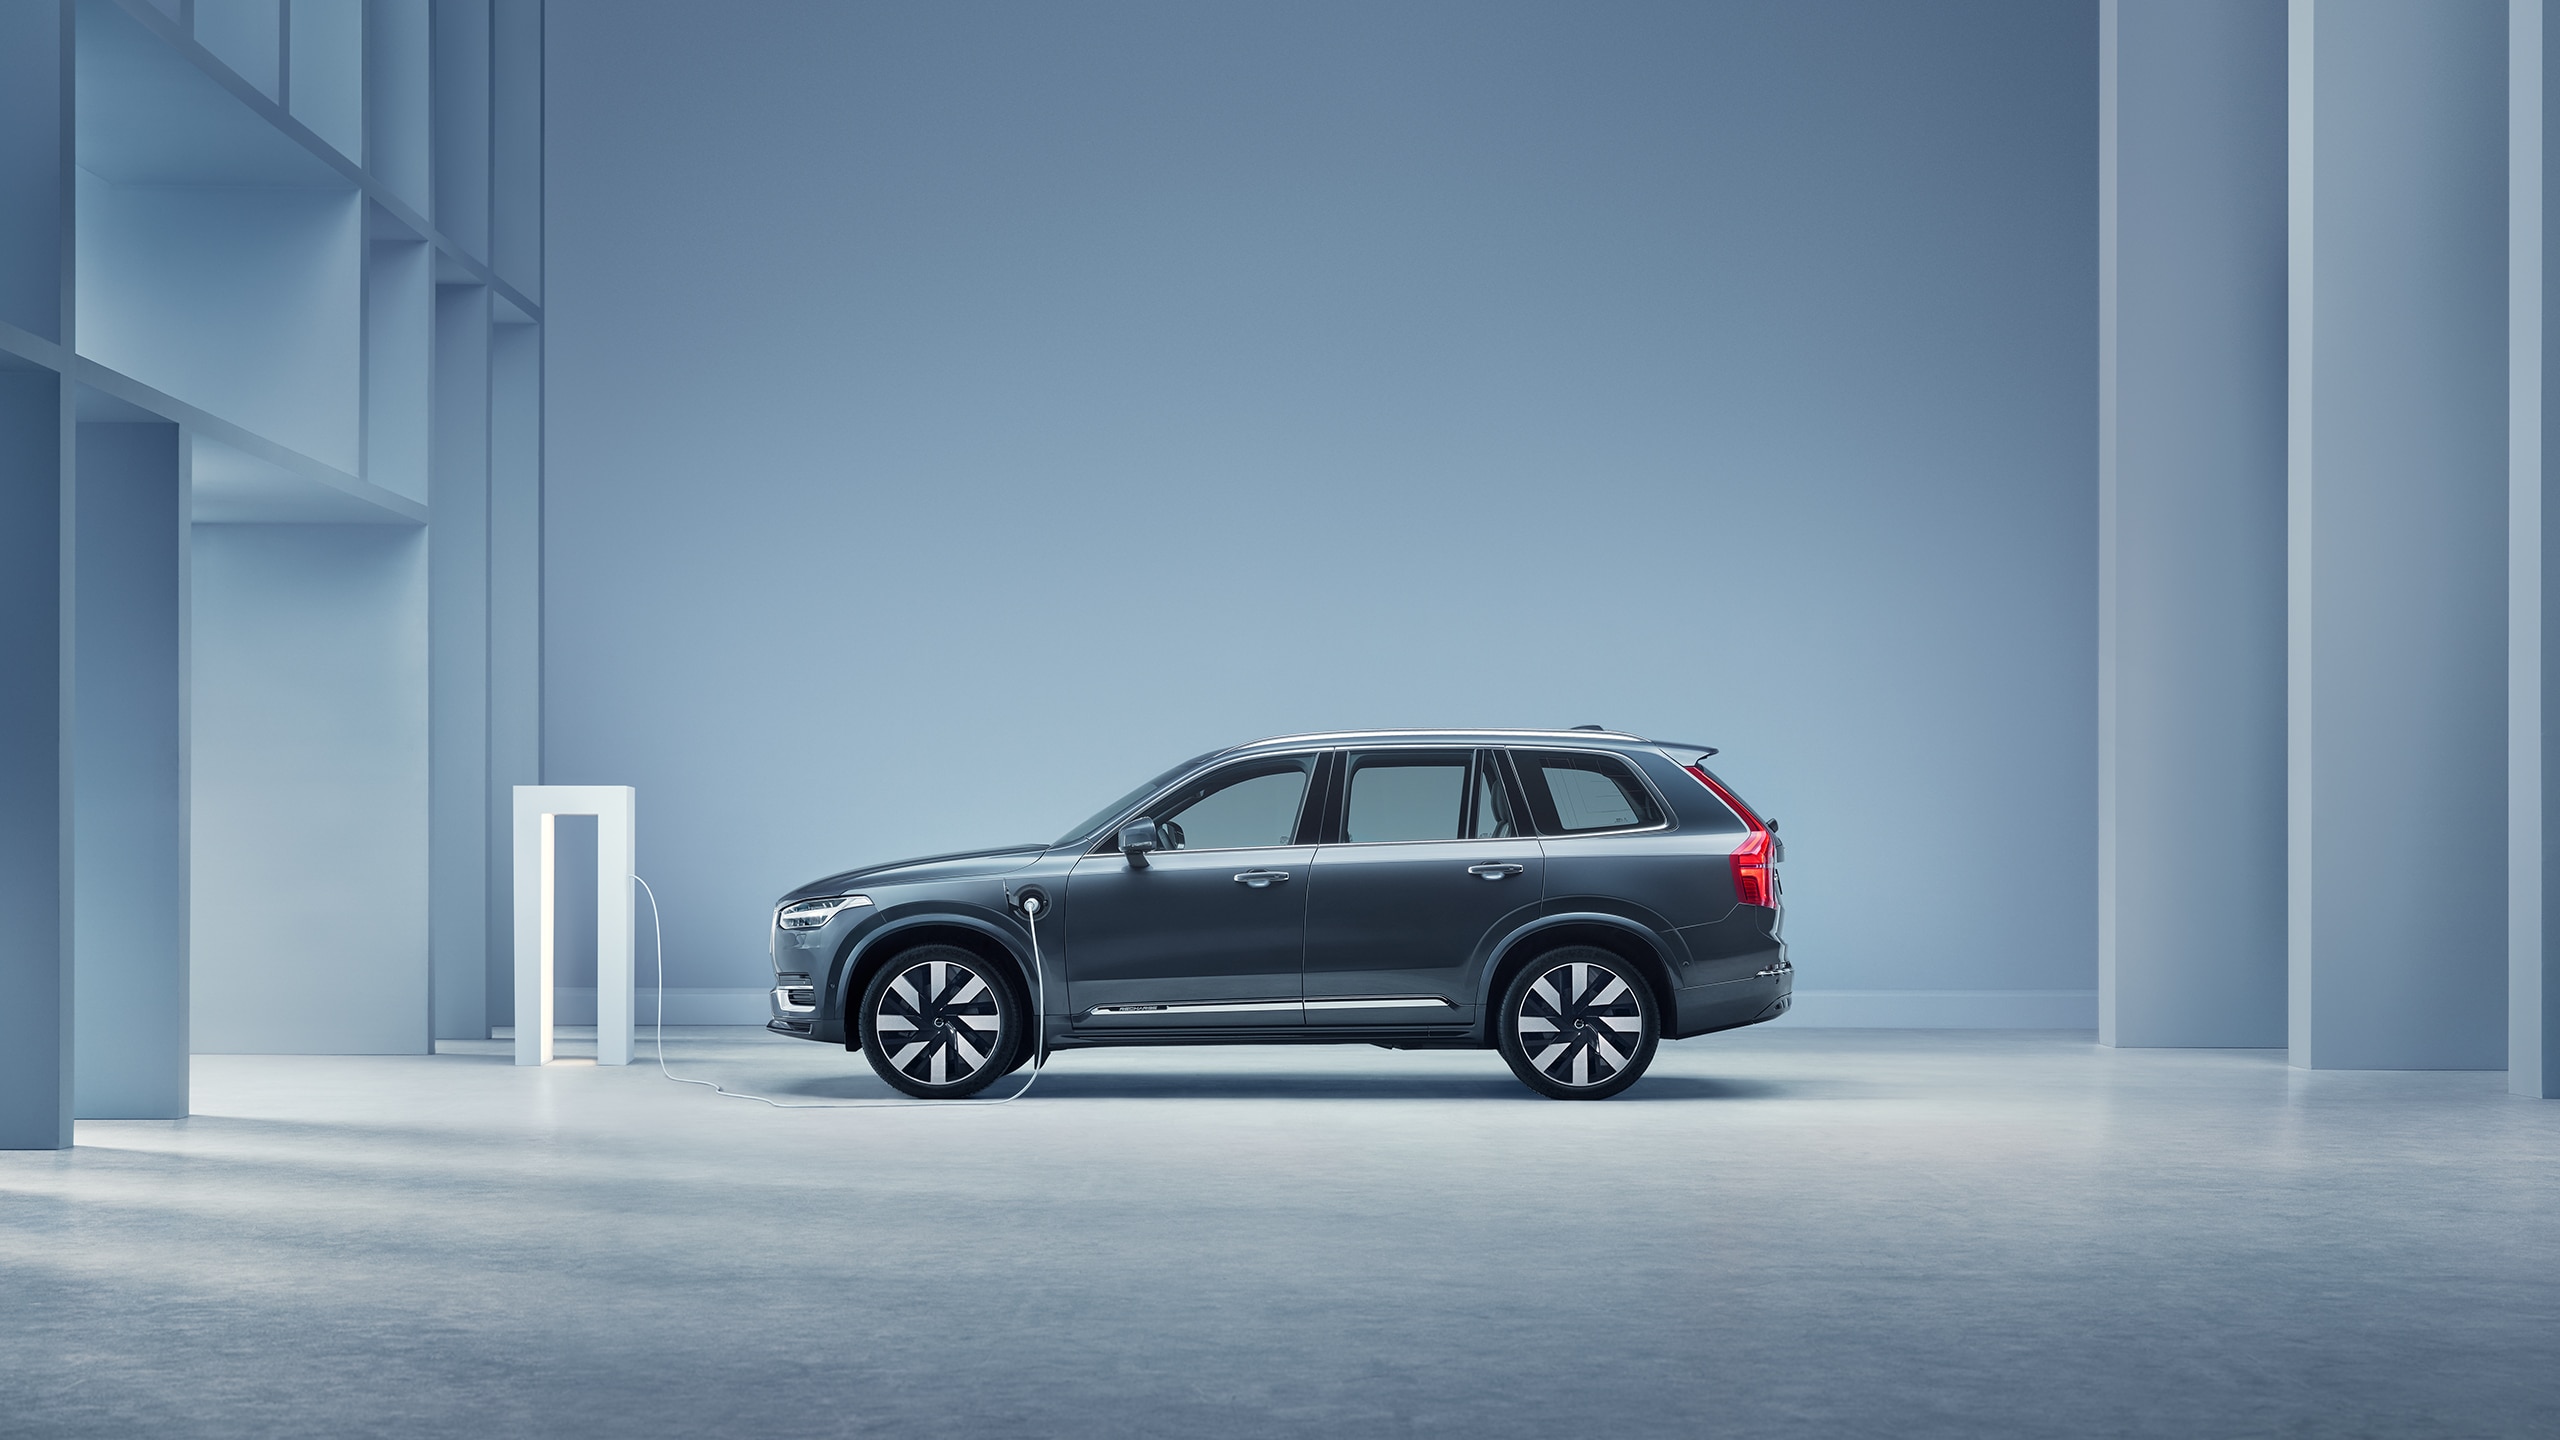 The side profile of a Volvo XC90 Recharge plug-in hybrid SUV